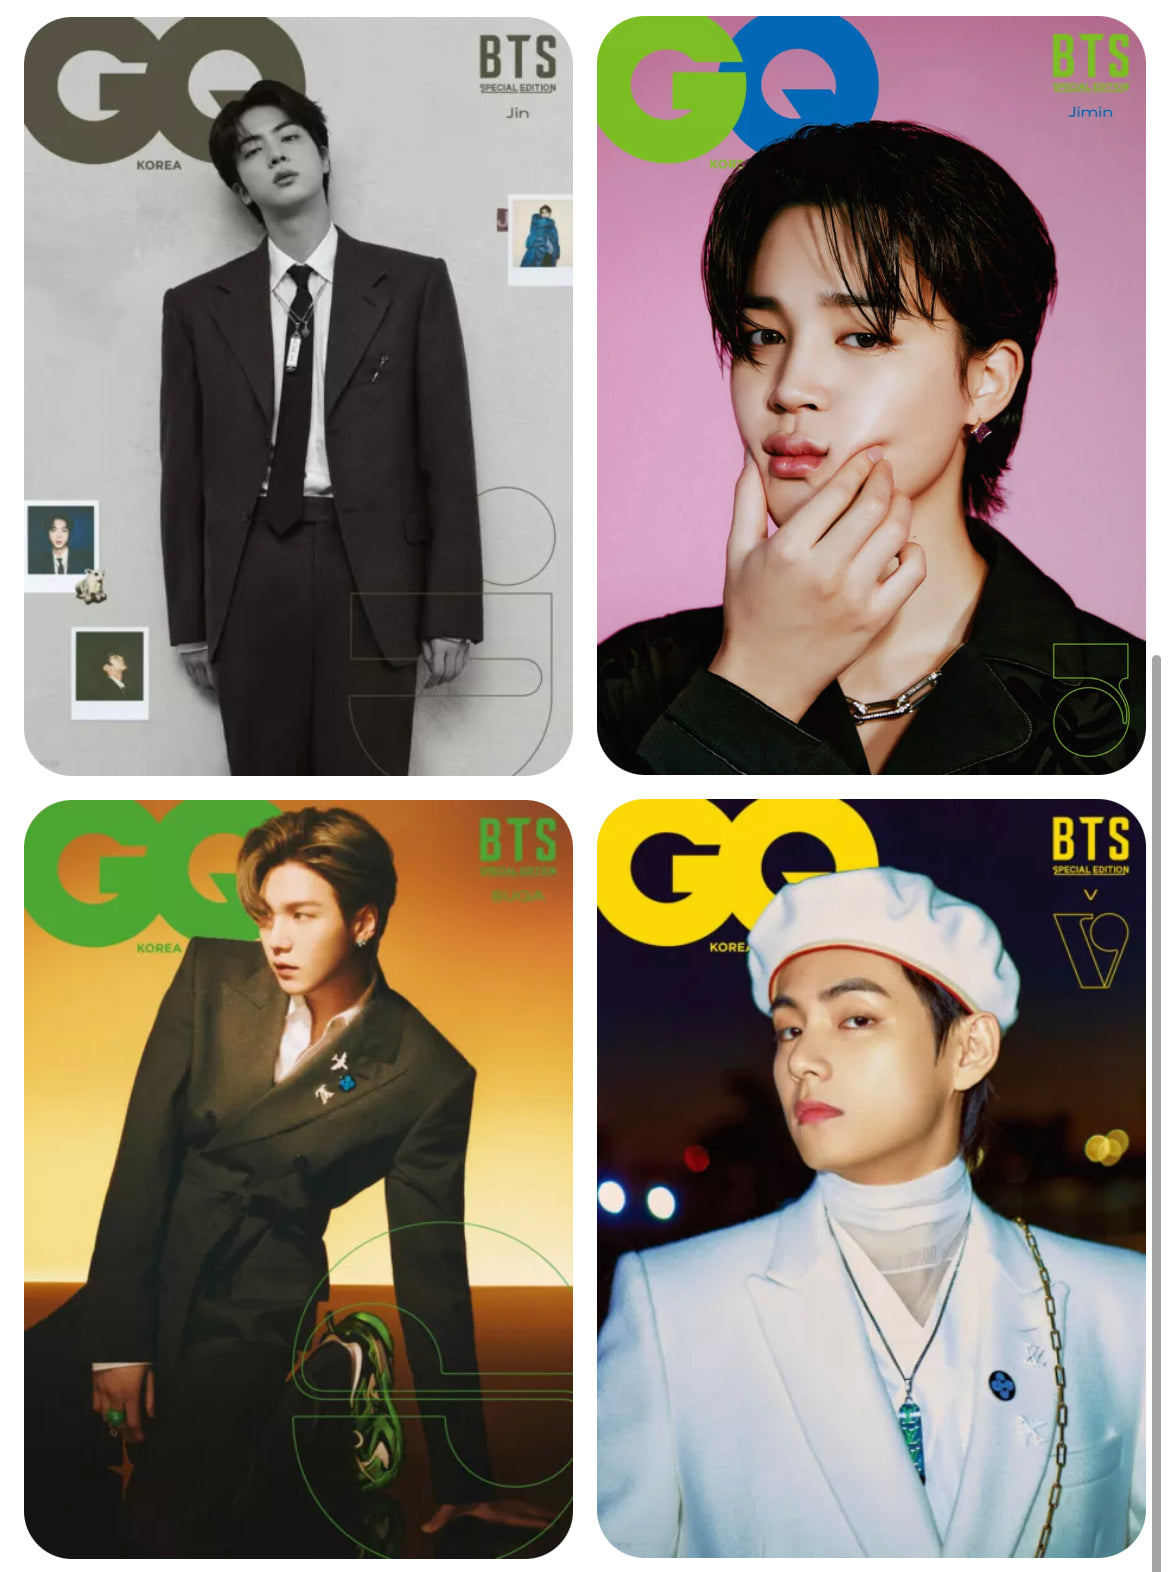 Korean media reports about GQ Fashion Editor selecting BTS's Jin as the  Pride of January